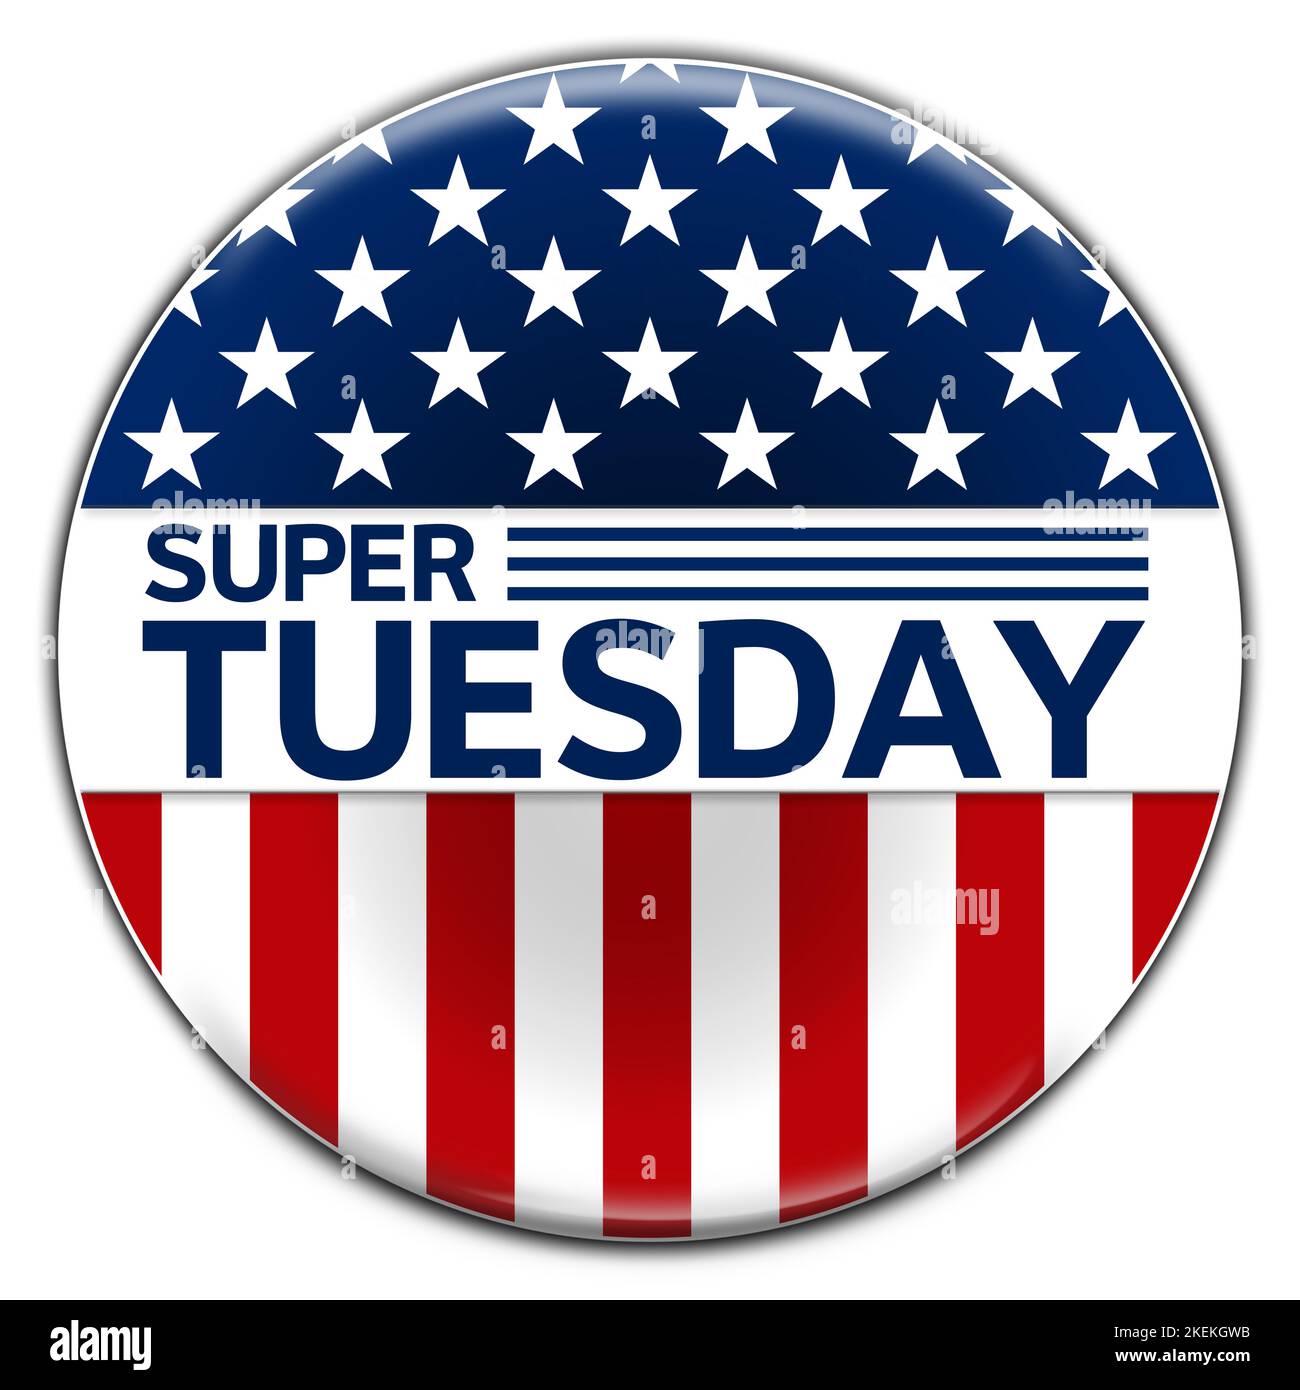 Super Tuesday - United States presidential primary election day Stock Photo